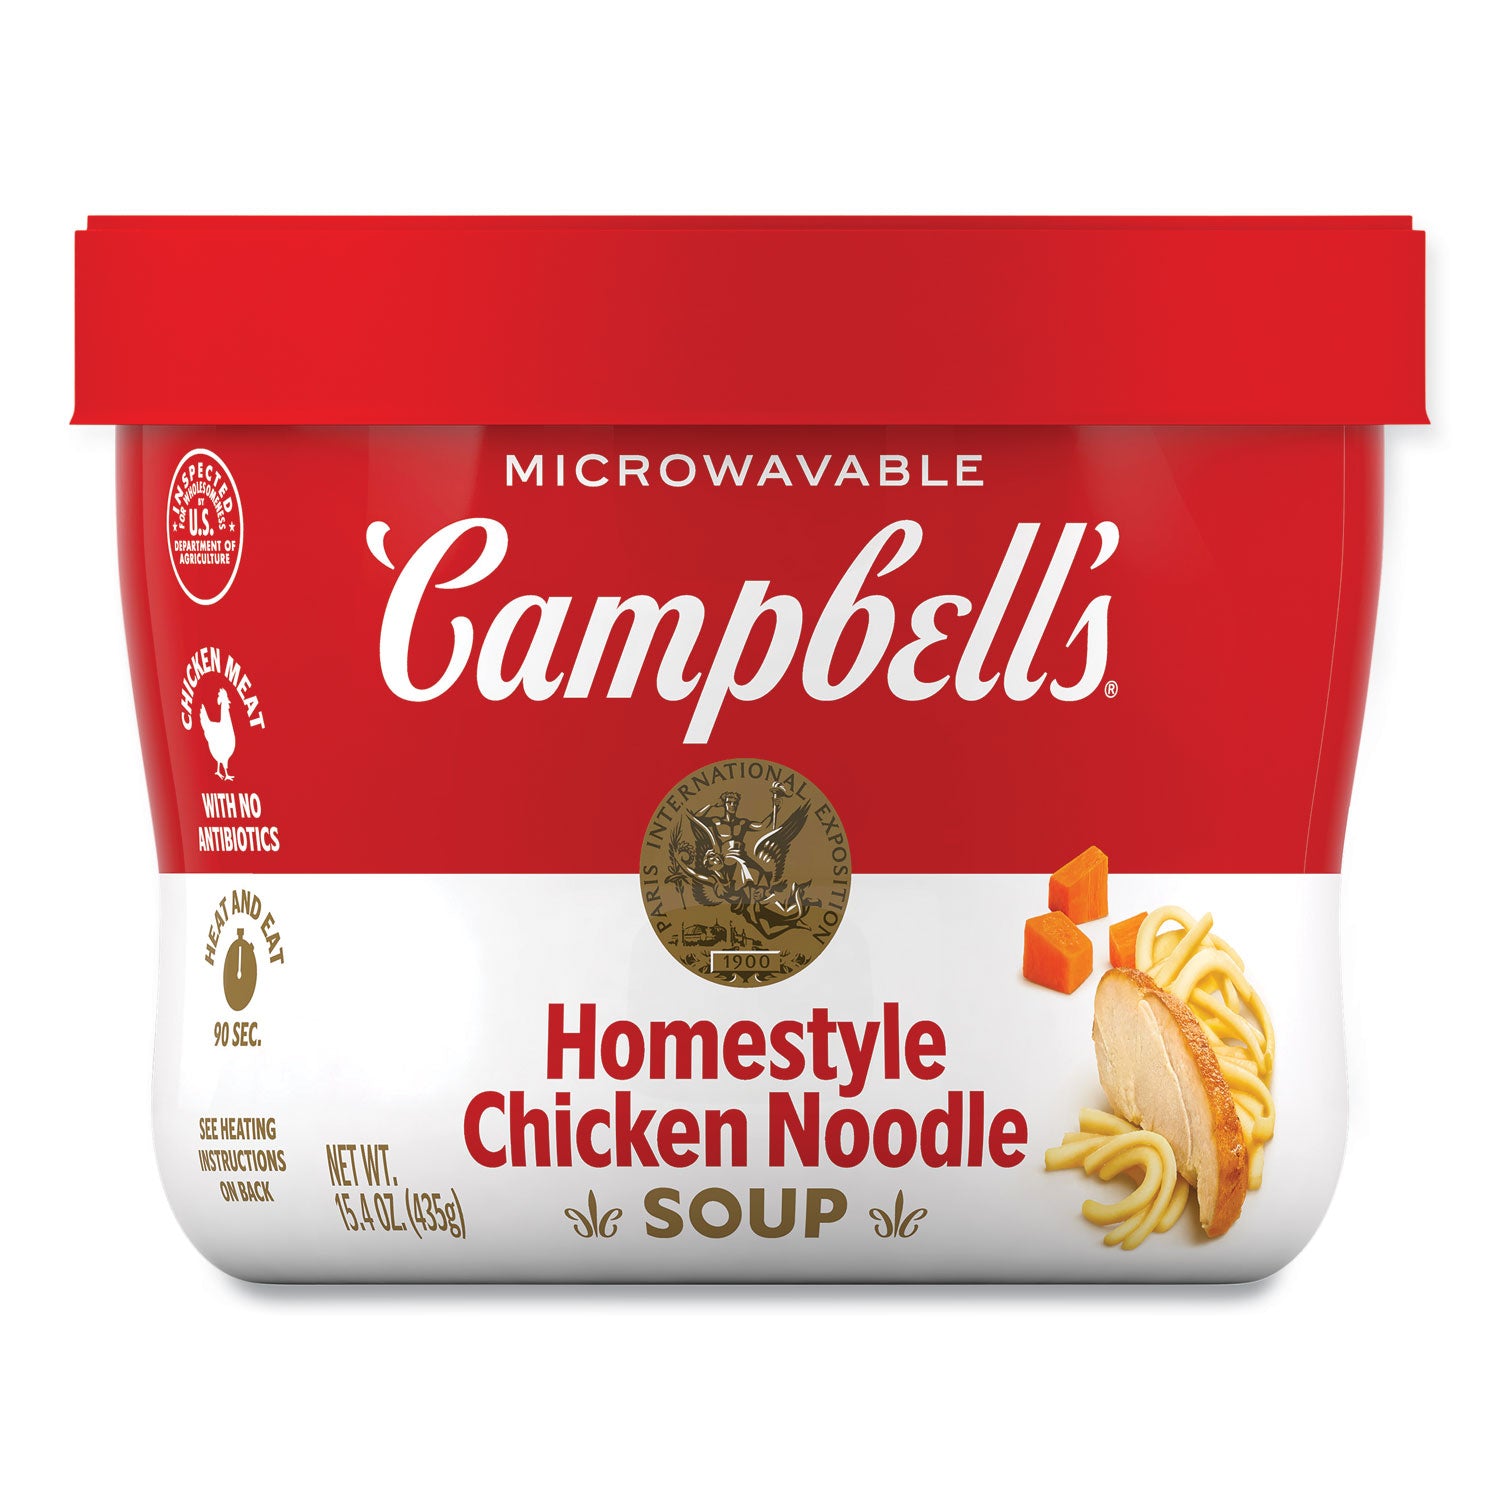 homestyle-chicken-noodle-bowl-154-oz-8-carton-ships-in-1-3-business-days_grr35100005 - 1